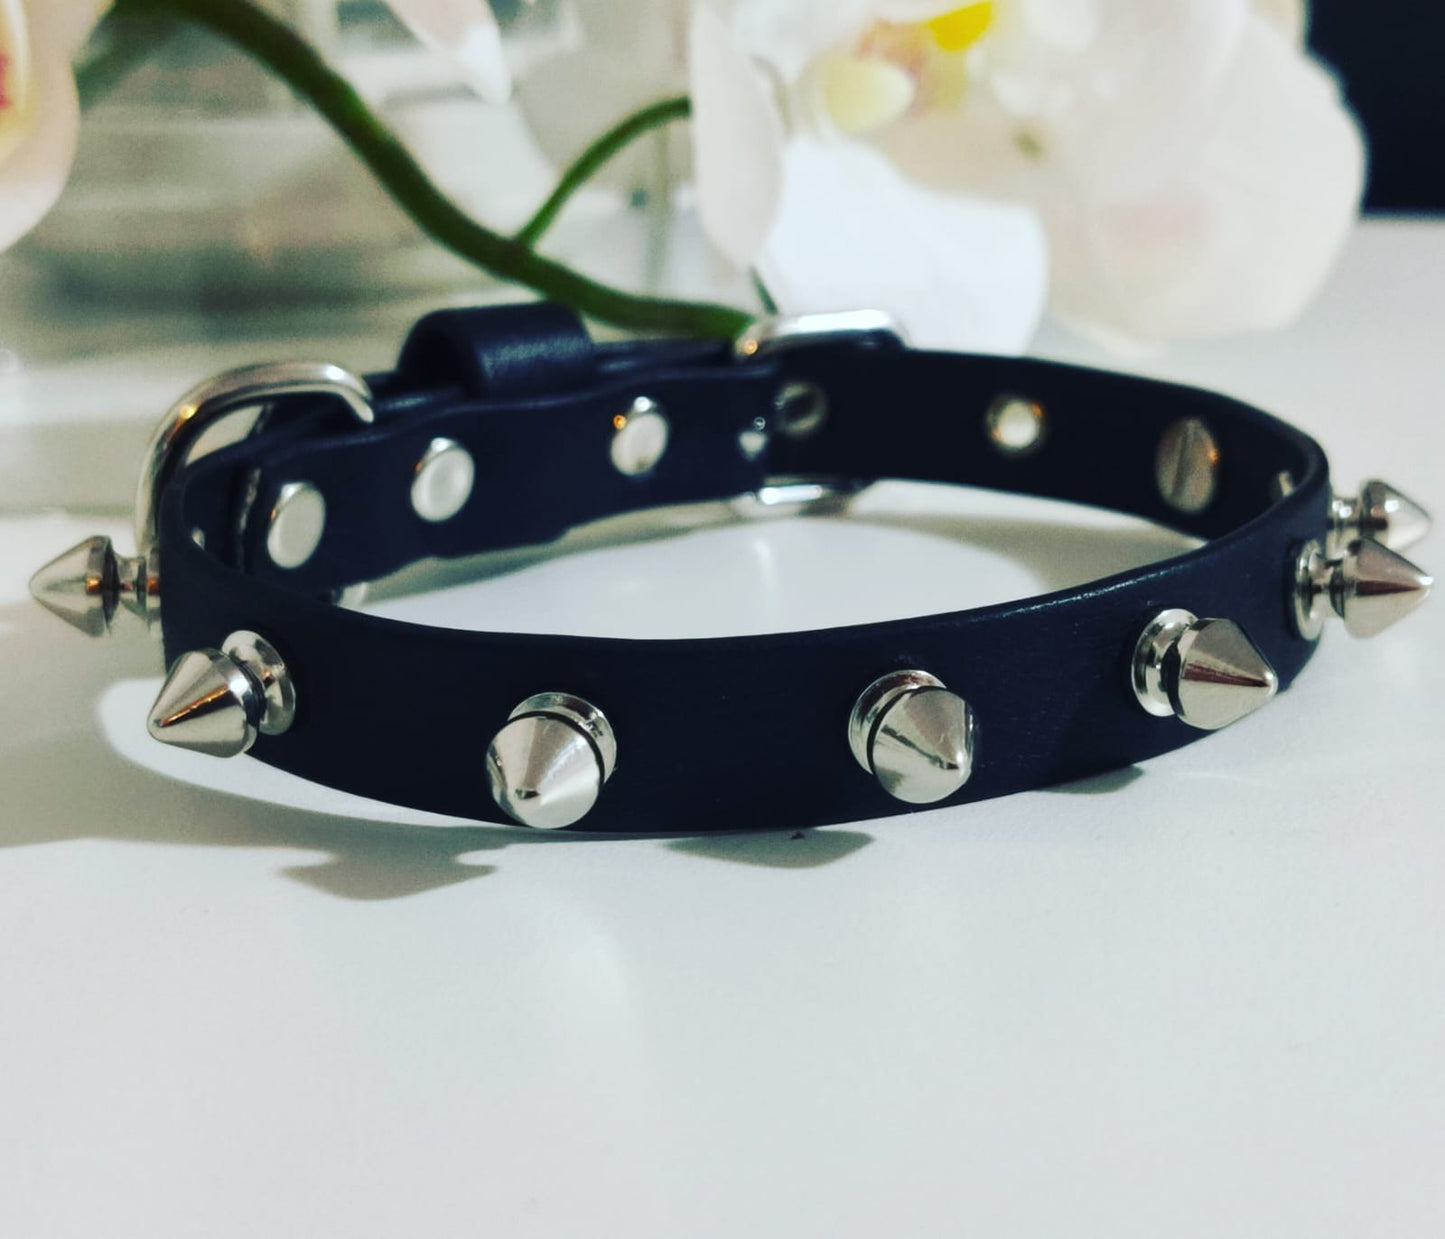 Collar with pointed studs applied by hand. In genuine leather 100% Made in Italy. Luxury accessories for your Pet.